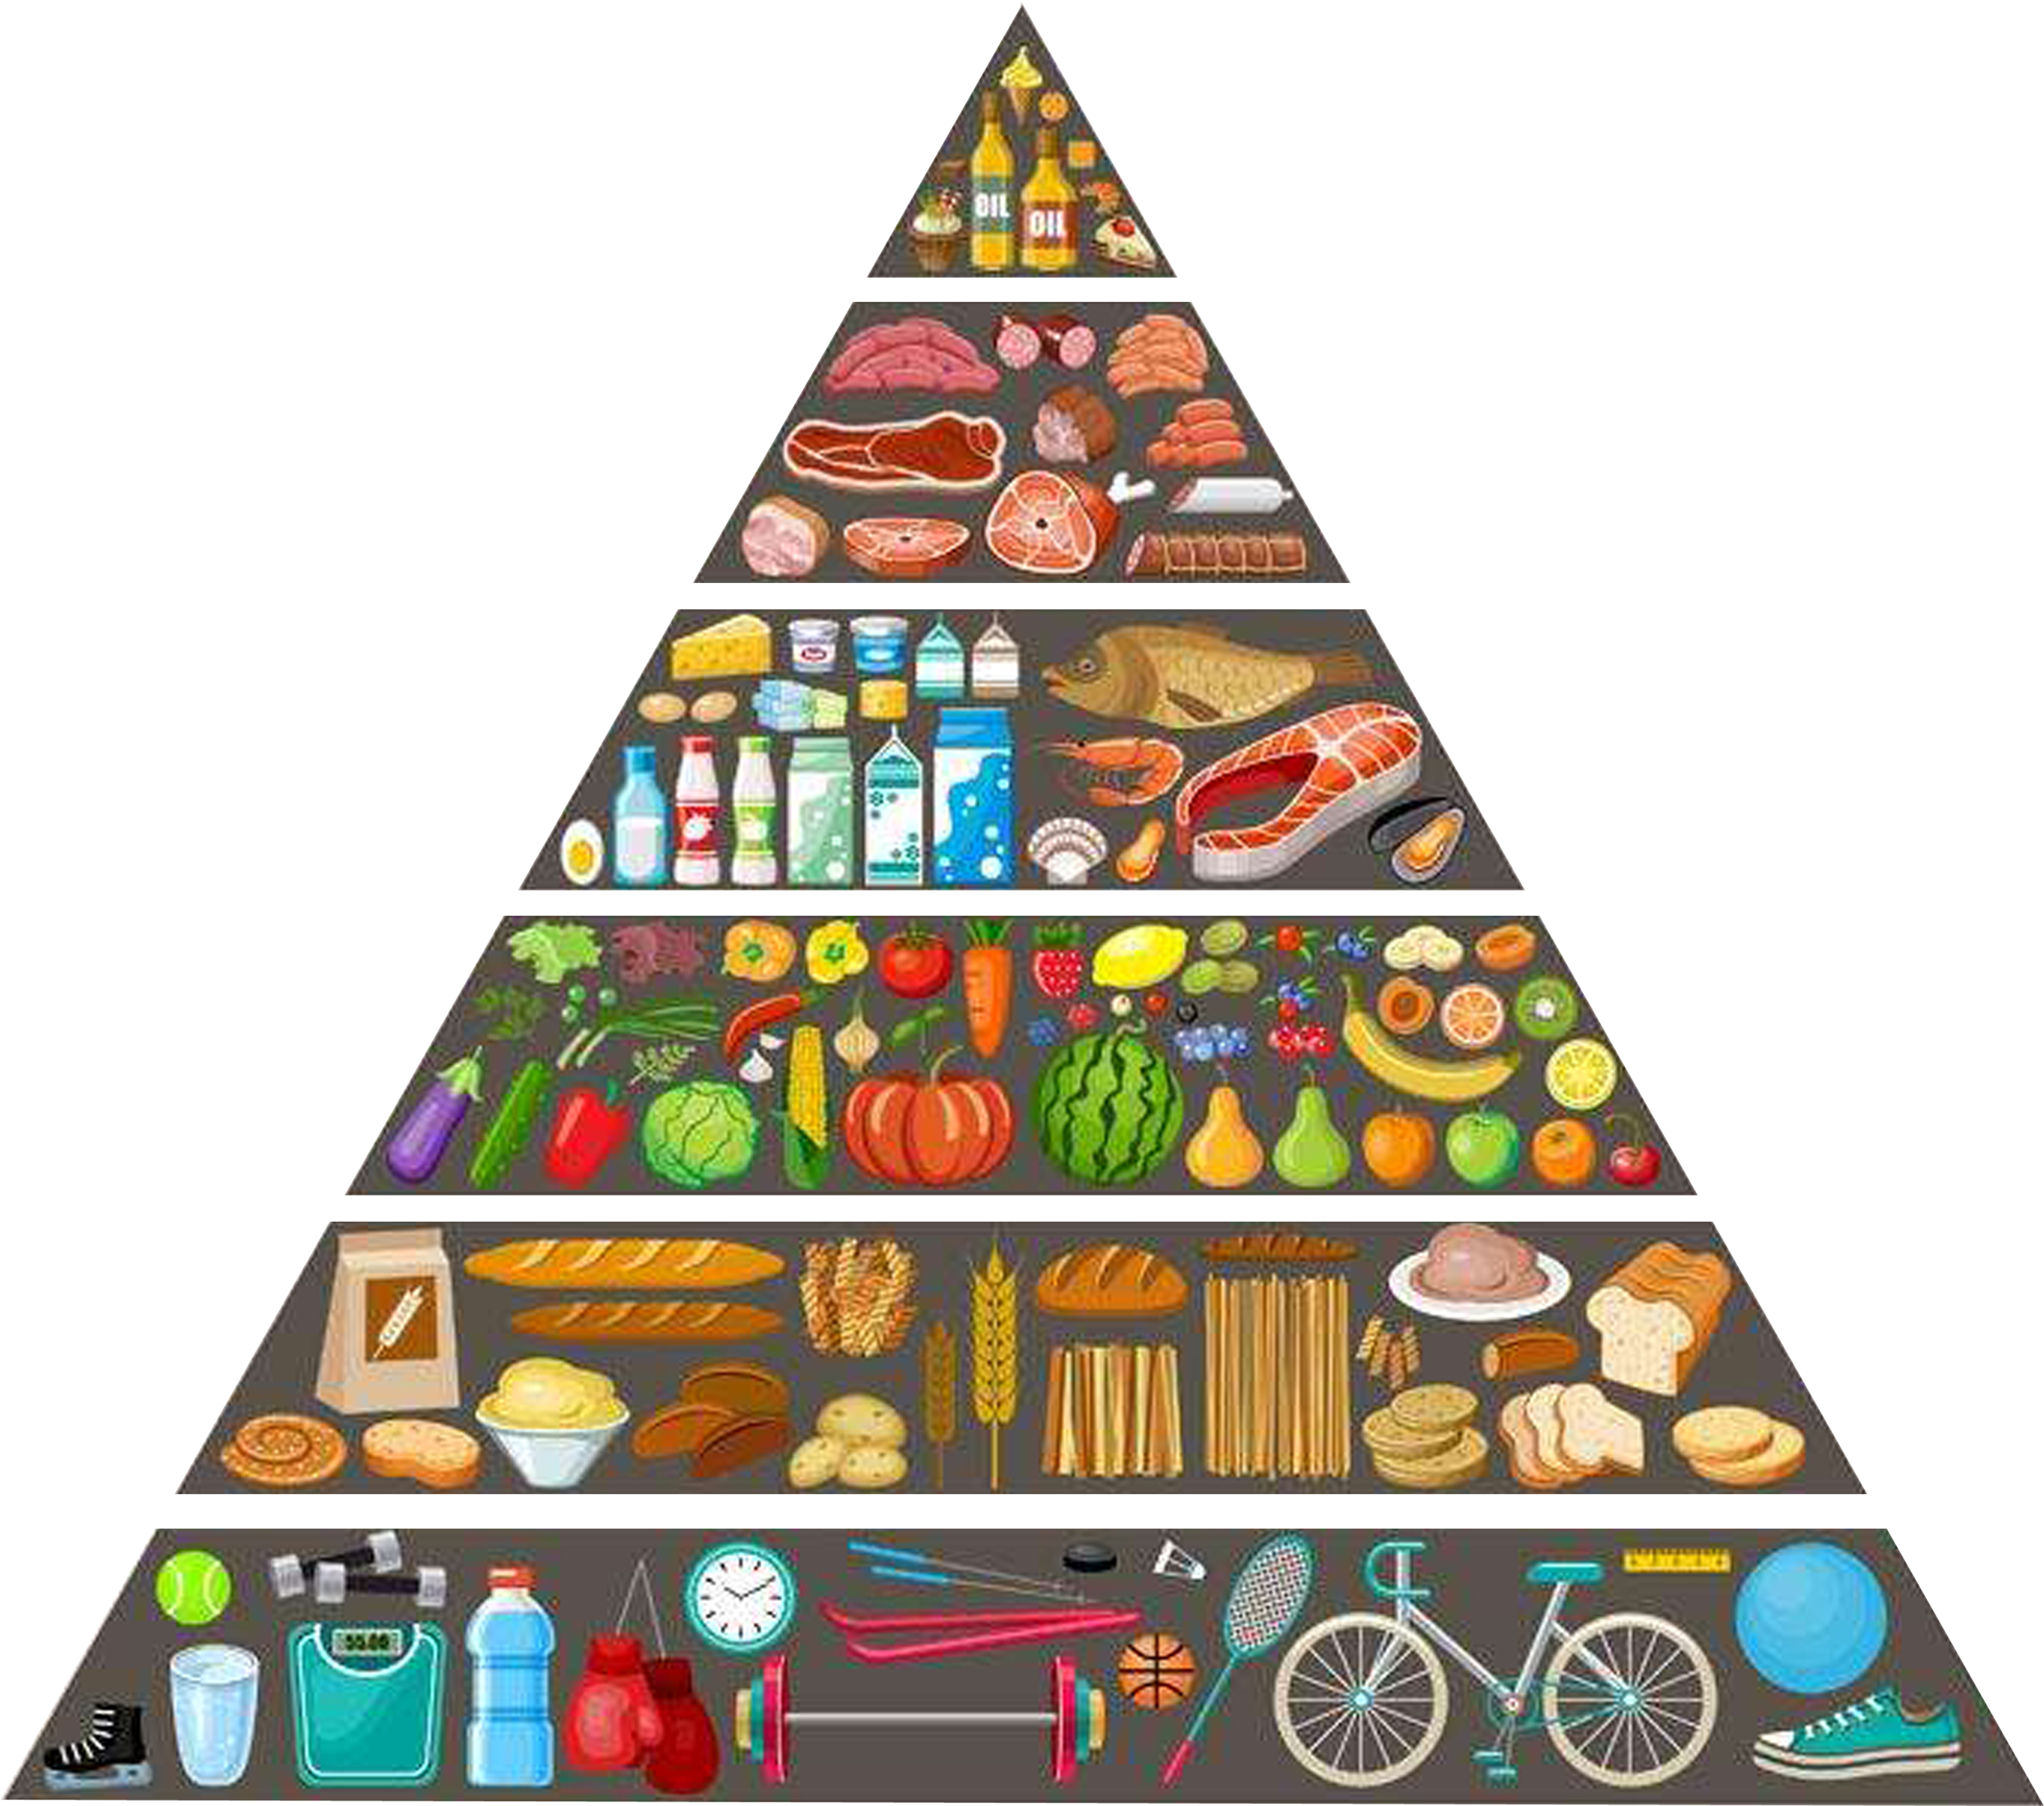 Download Food Pyramid Food Group Healthy Diet - Food Pyramid Transparent Background  PNG Image with No Background 